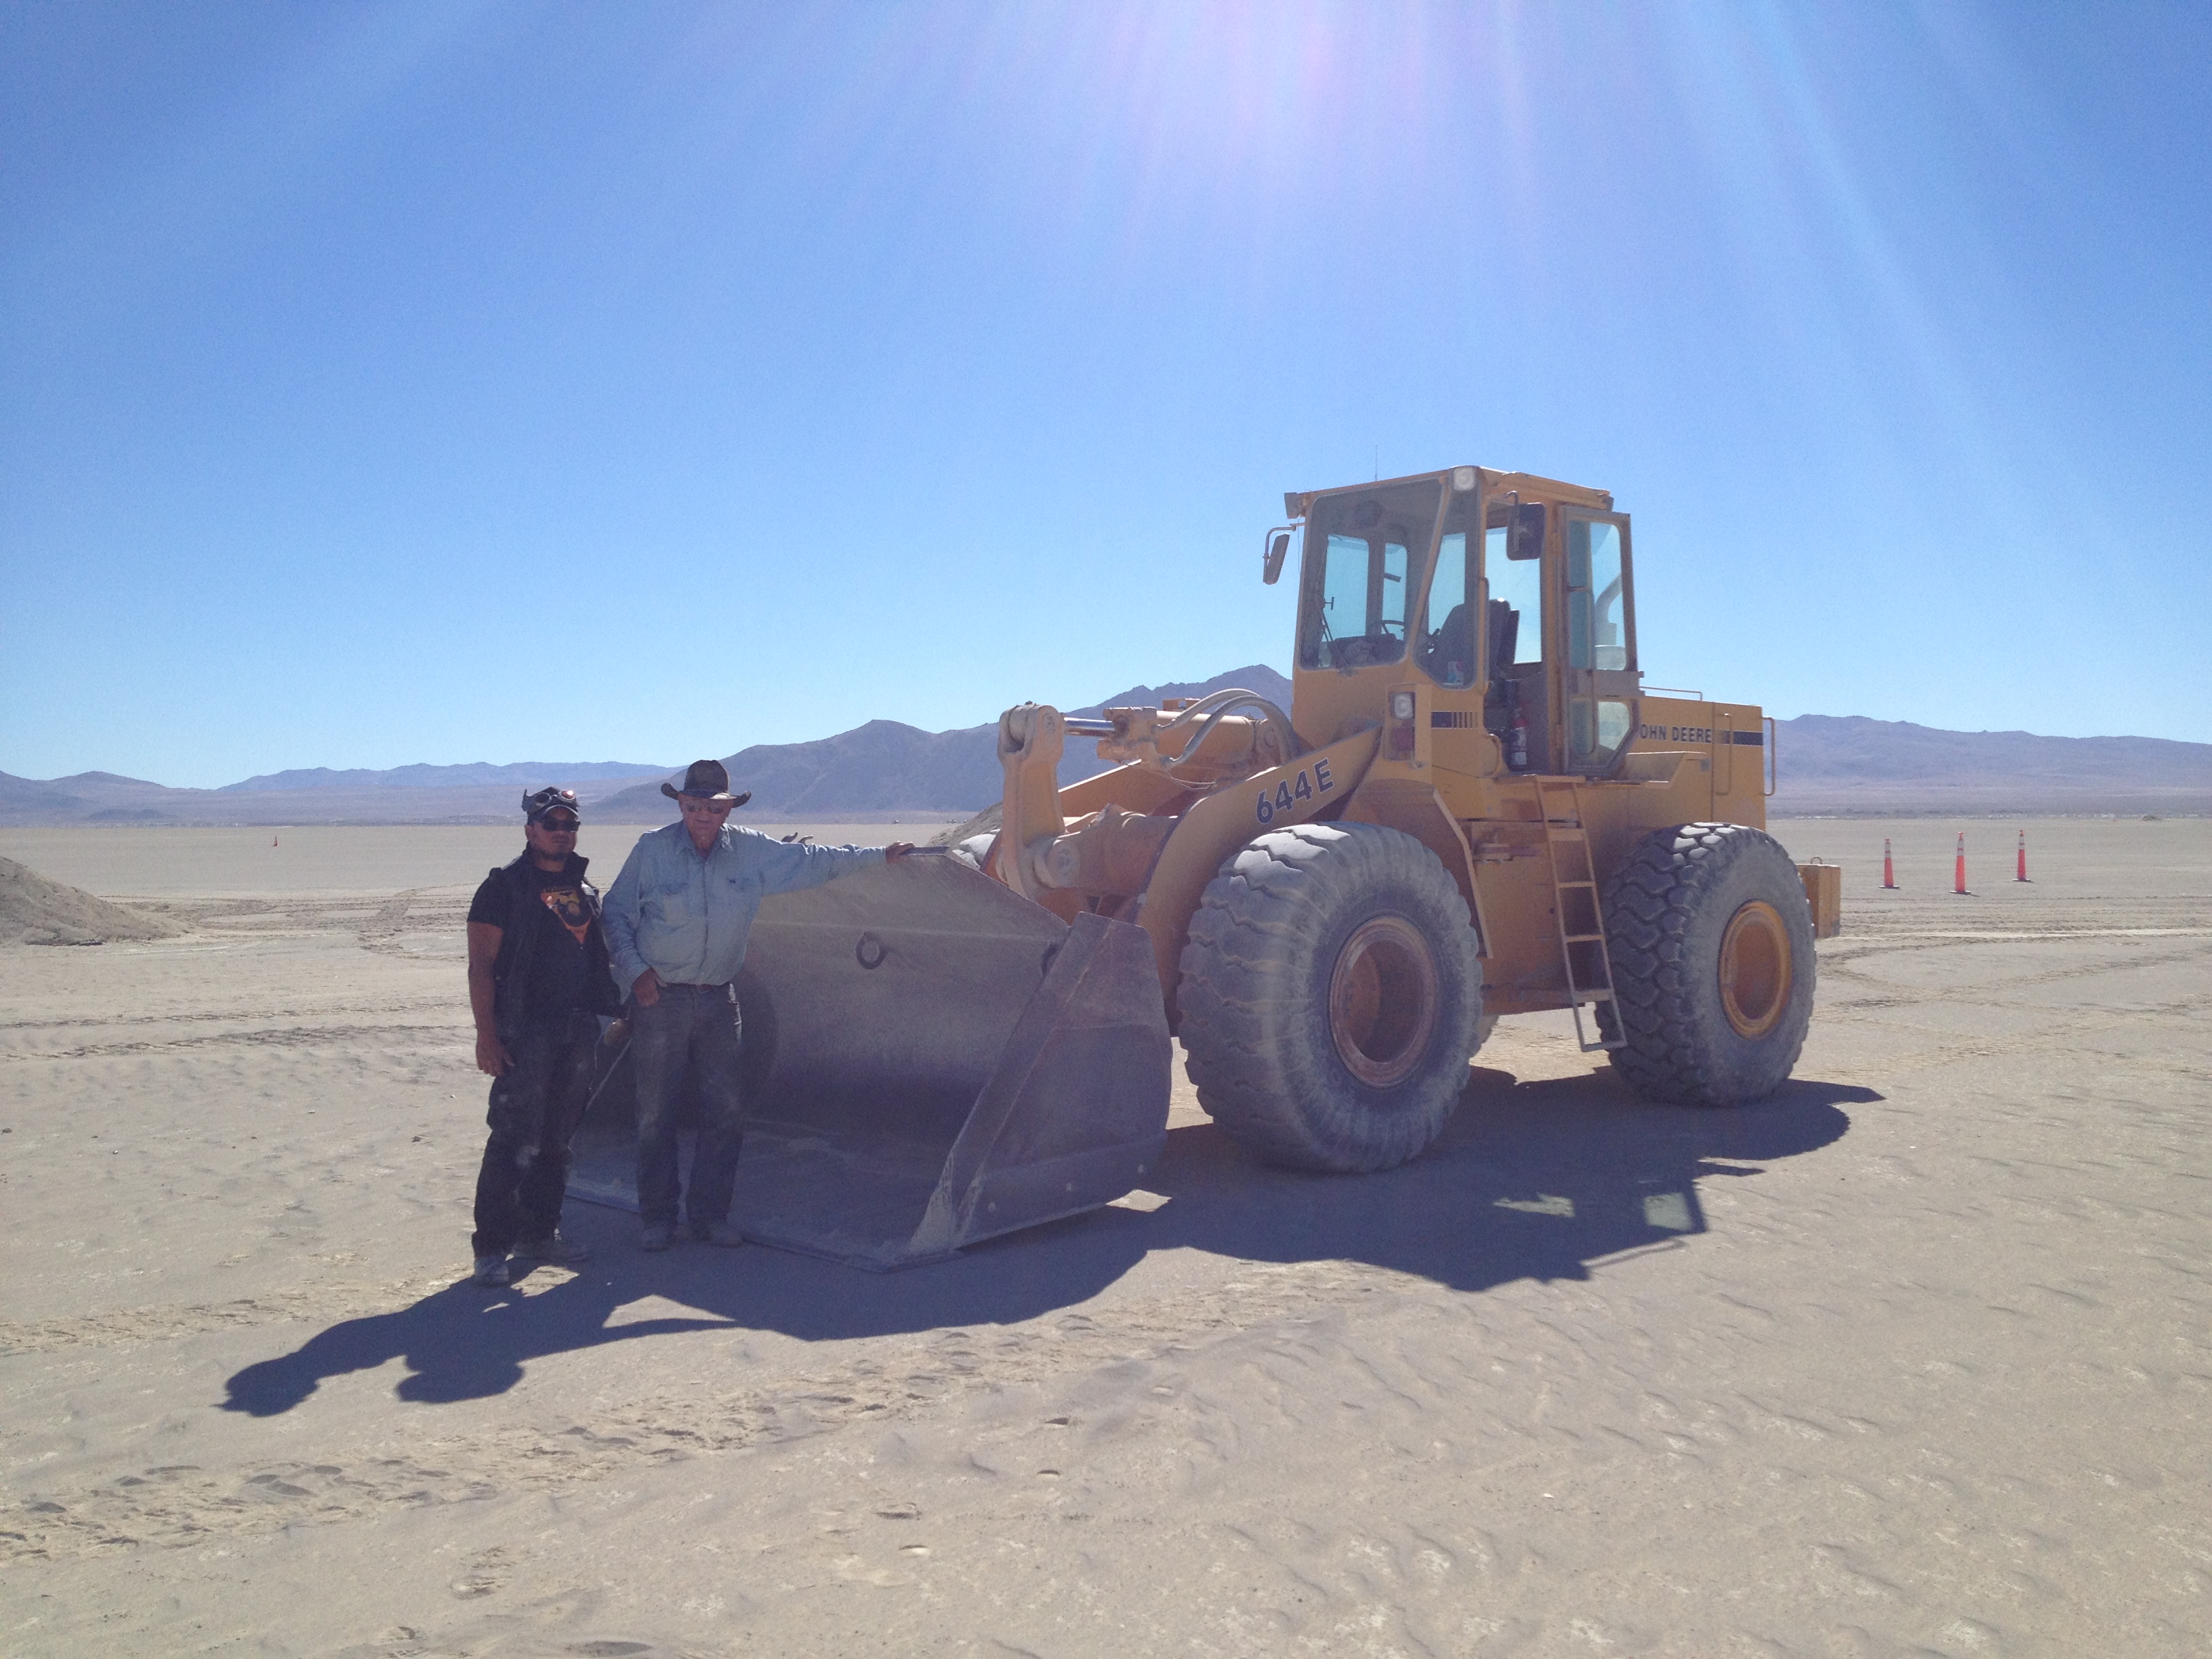 Stuart from Gerlach (standing on the right, with Resto boss D.A.) works with Willie Courtney to use his heavy equipment to deal with the decomposed granite generated by Burning Man's large burns. Decomposed granite, or DG, is local to the area, and was suggested by the BLM as a heat-absorbing way to protect the playa from burn scars. DPW pulls the MOOP and metal scraps out of the cinders; the DG gets scooped up, cleaned, and reused.